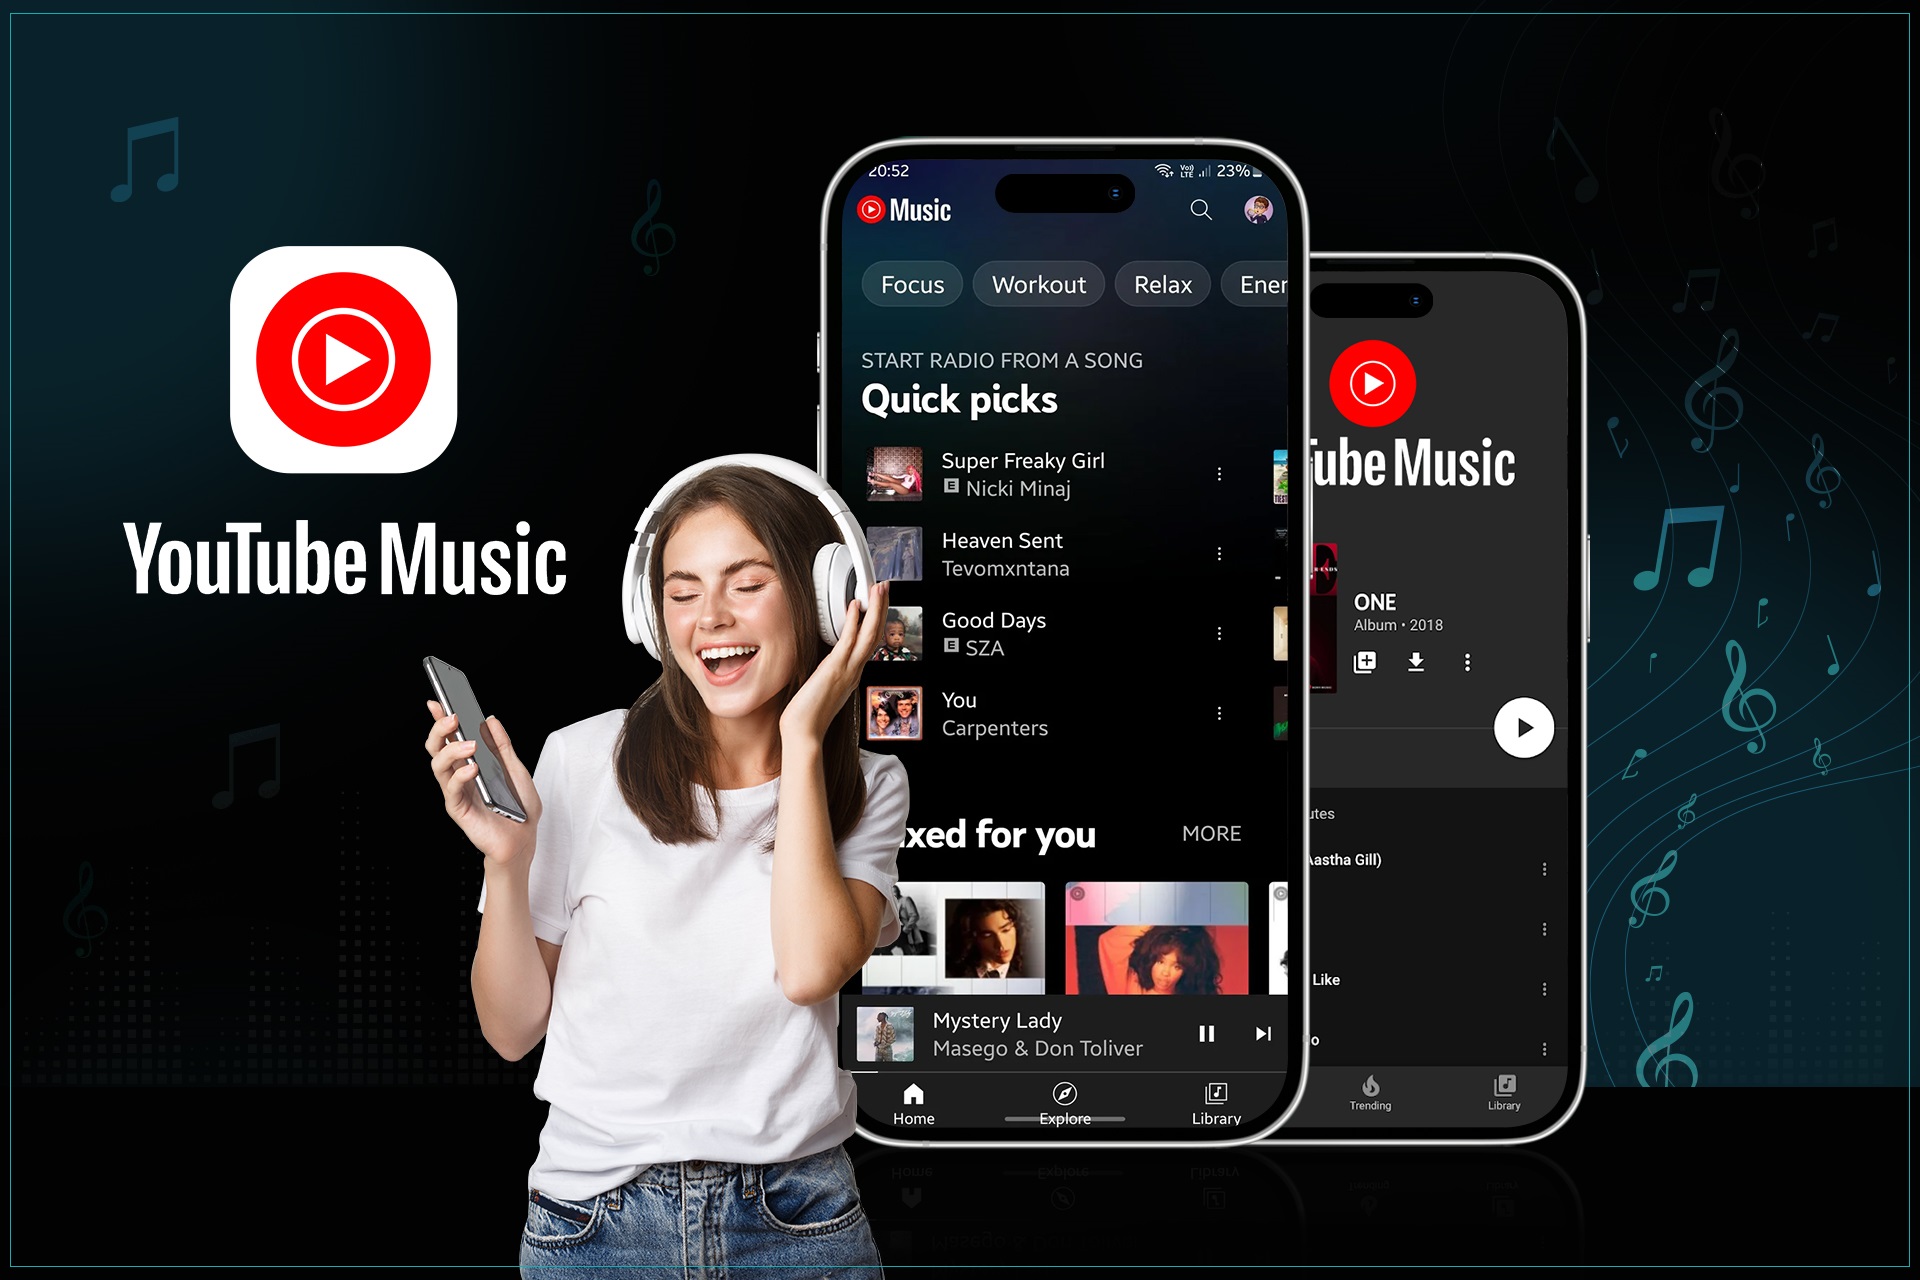 What-is-the-Development-Cost-of-an-App-like-YouTube-Music